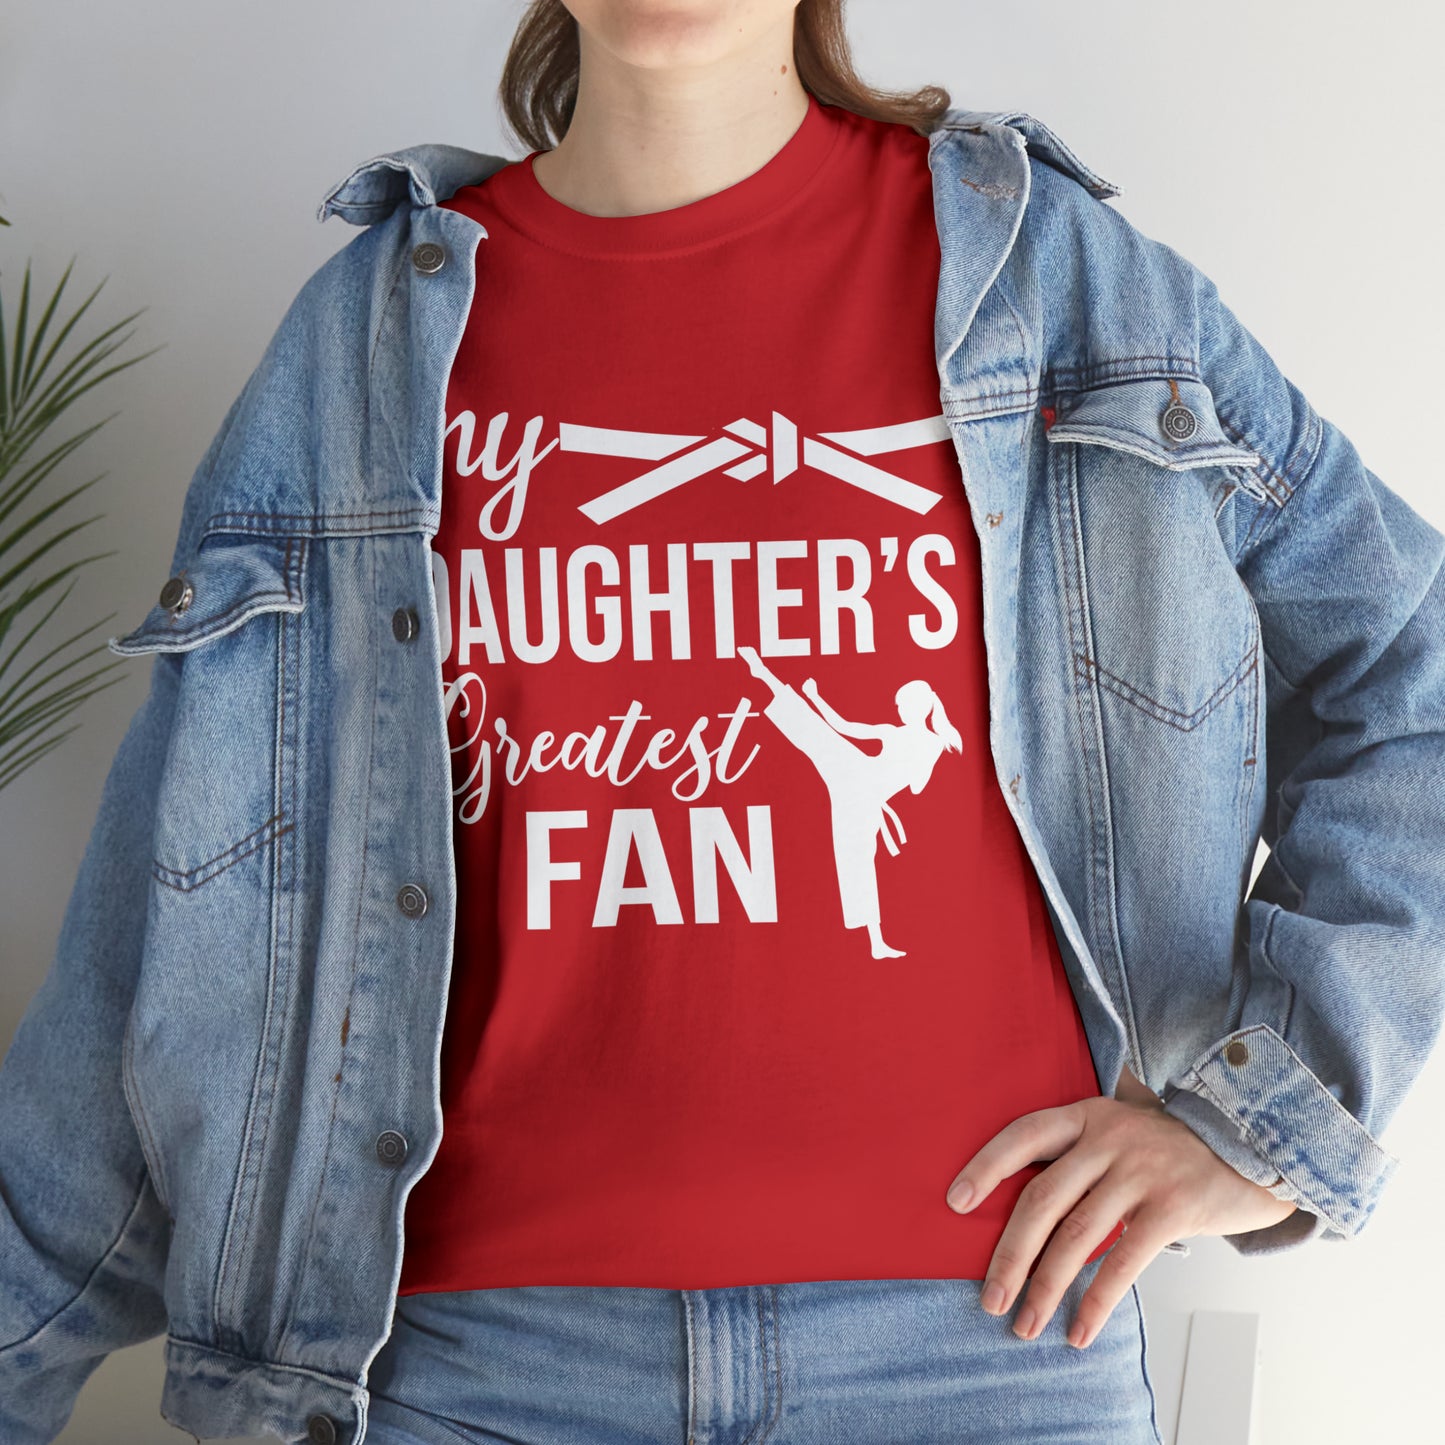 My Daughter's Greatest Fan! Shirt For Mom or Dad Heavy Cotton T-Shirt